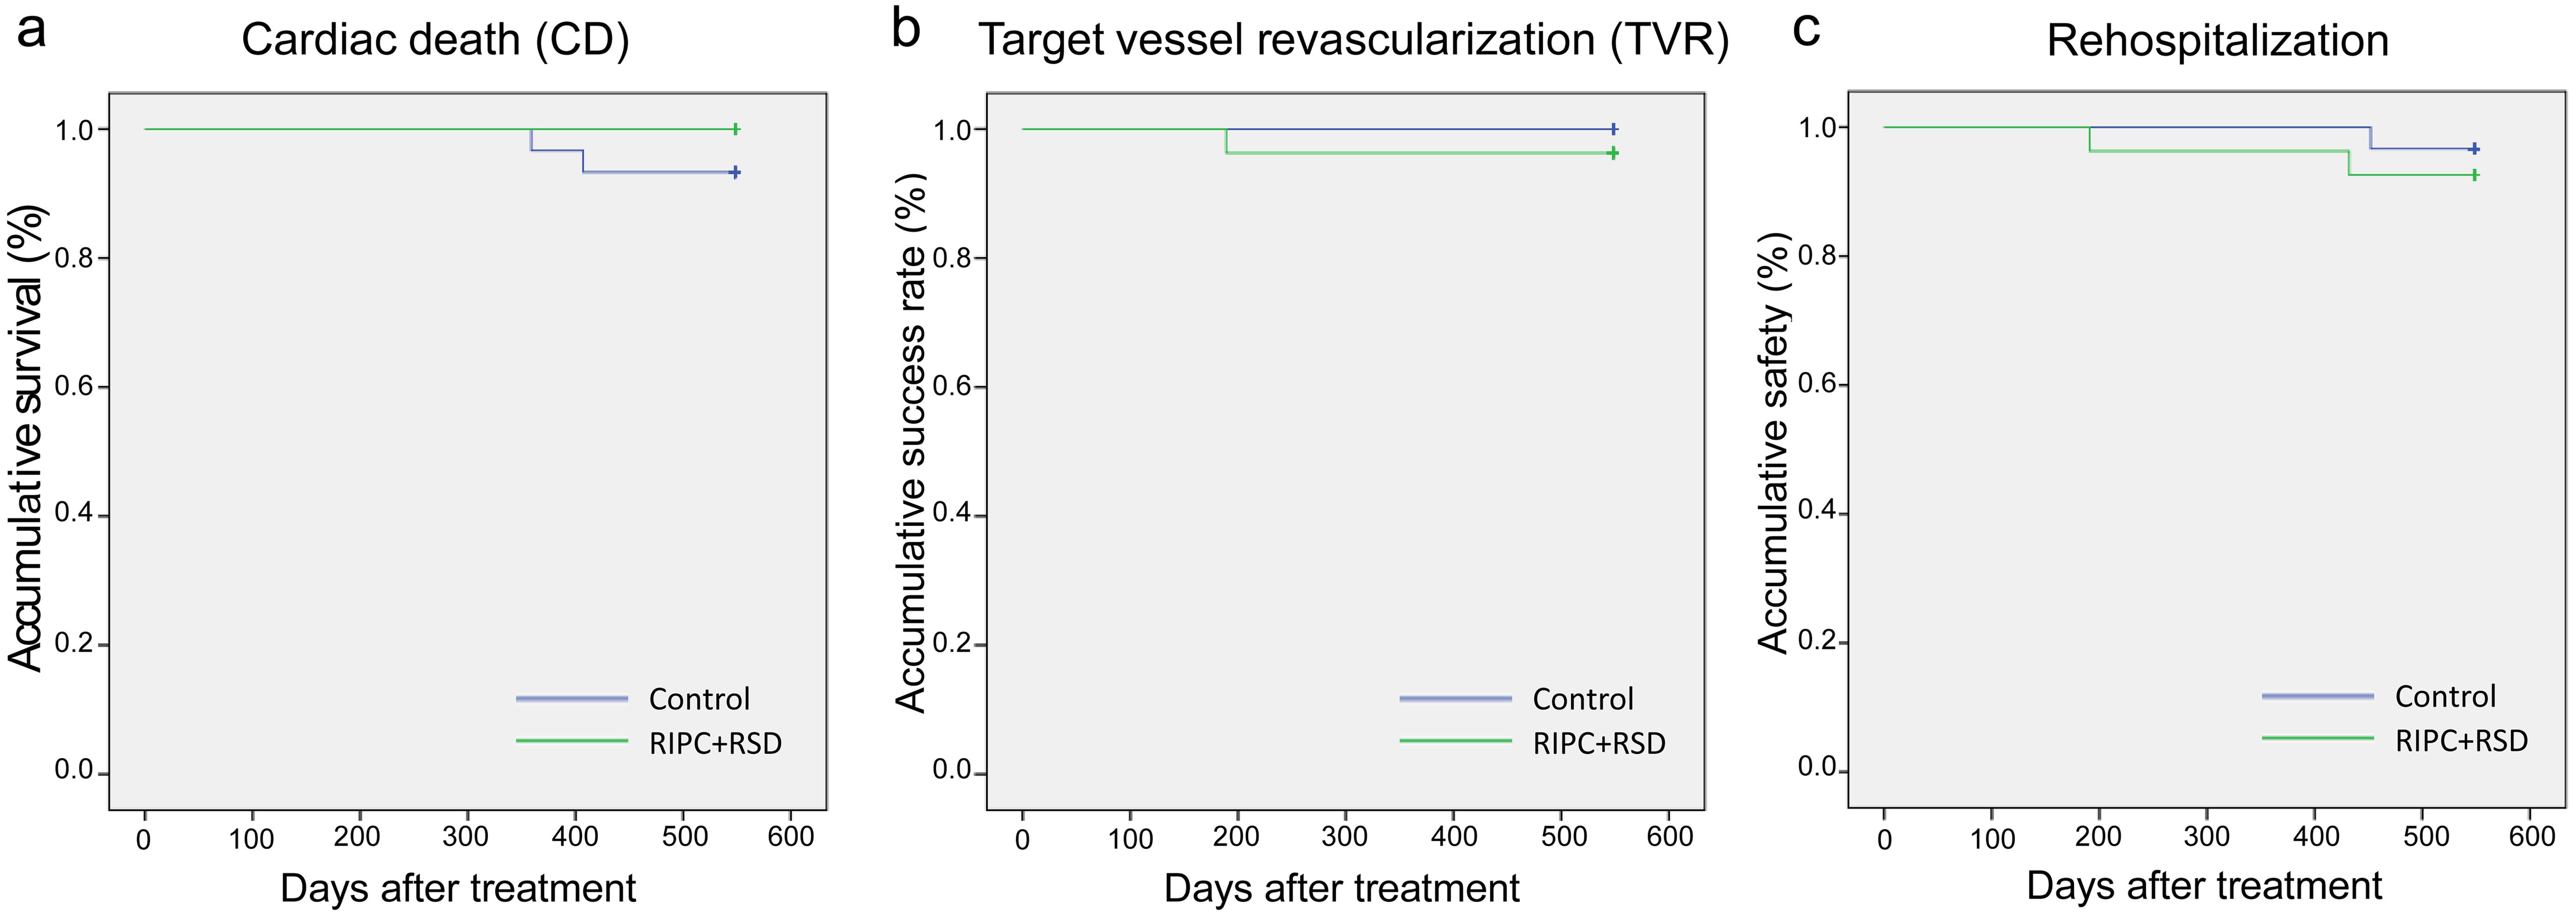 The survival plots for cumulative rates of cardiac death, target vessel revascularization and rehospitalization.